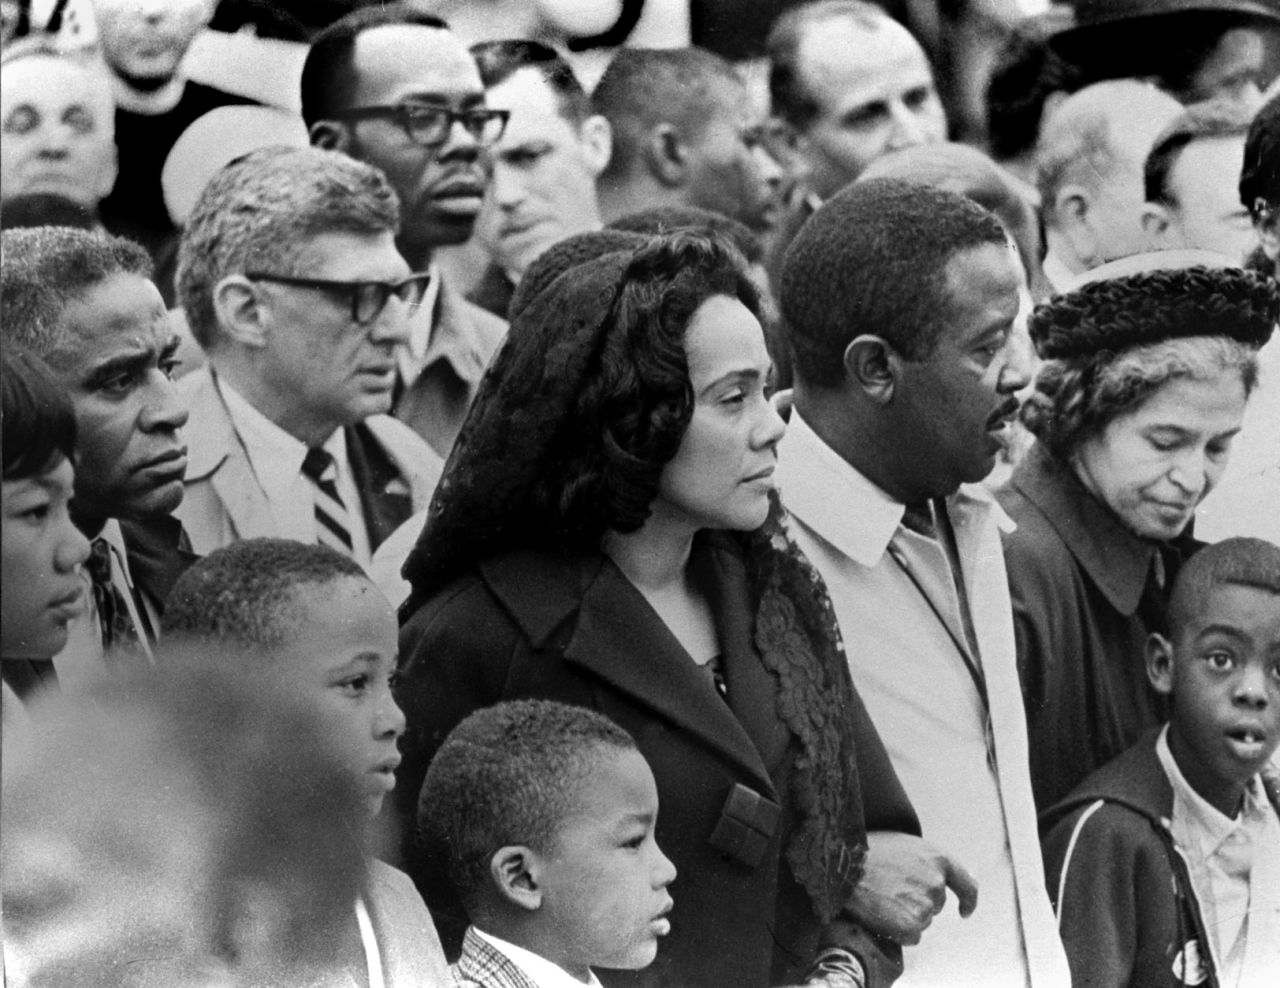 Parks, far right, joins a march through Memphis, Tennessee, on April 8, 1968 -- four days after the death of the Rev. Martin Luther King Jr. King organized the Montgomery bus boycott. His widow, Coretta Scott King, is seen at center next to the Rev. Ralph Abernathy.